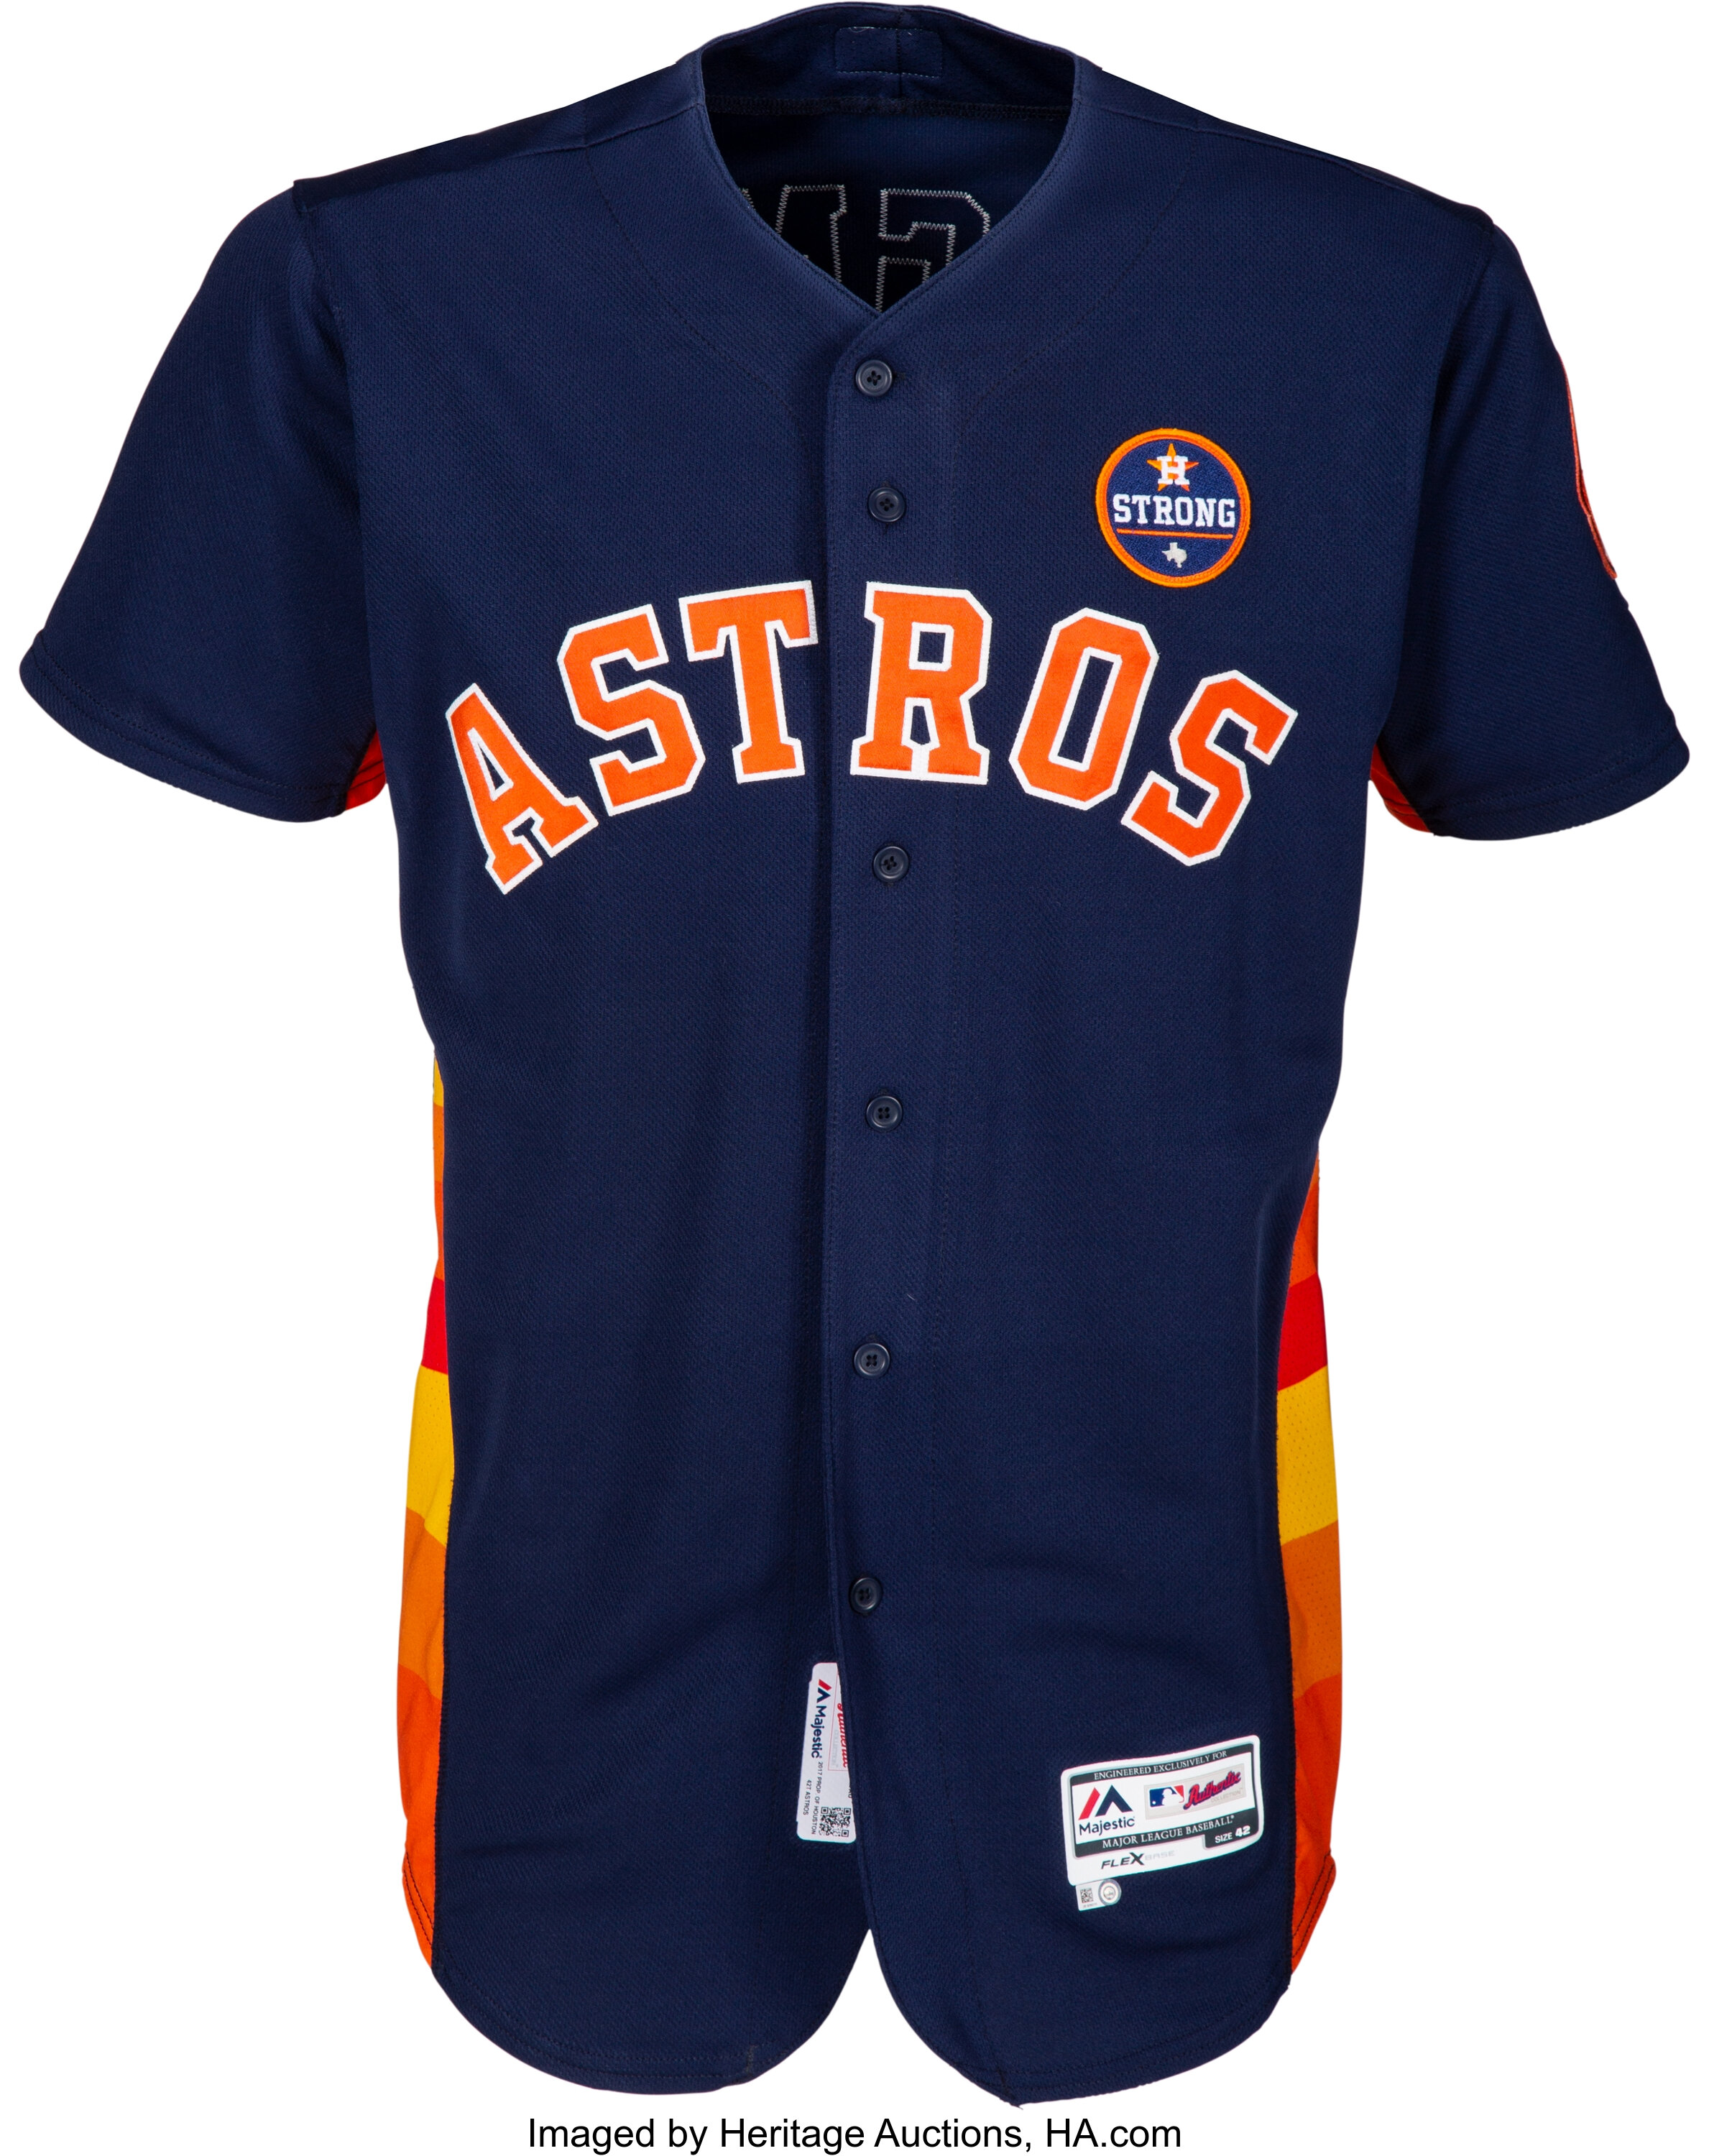 Houston Astros Game Used MLB Jerseys for sale